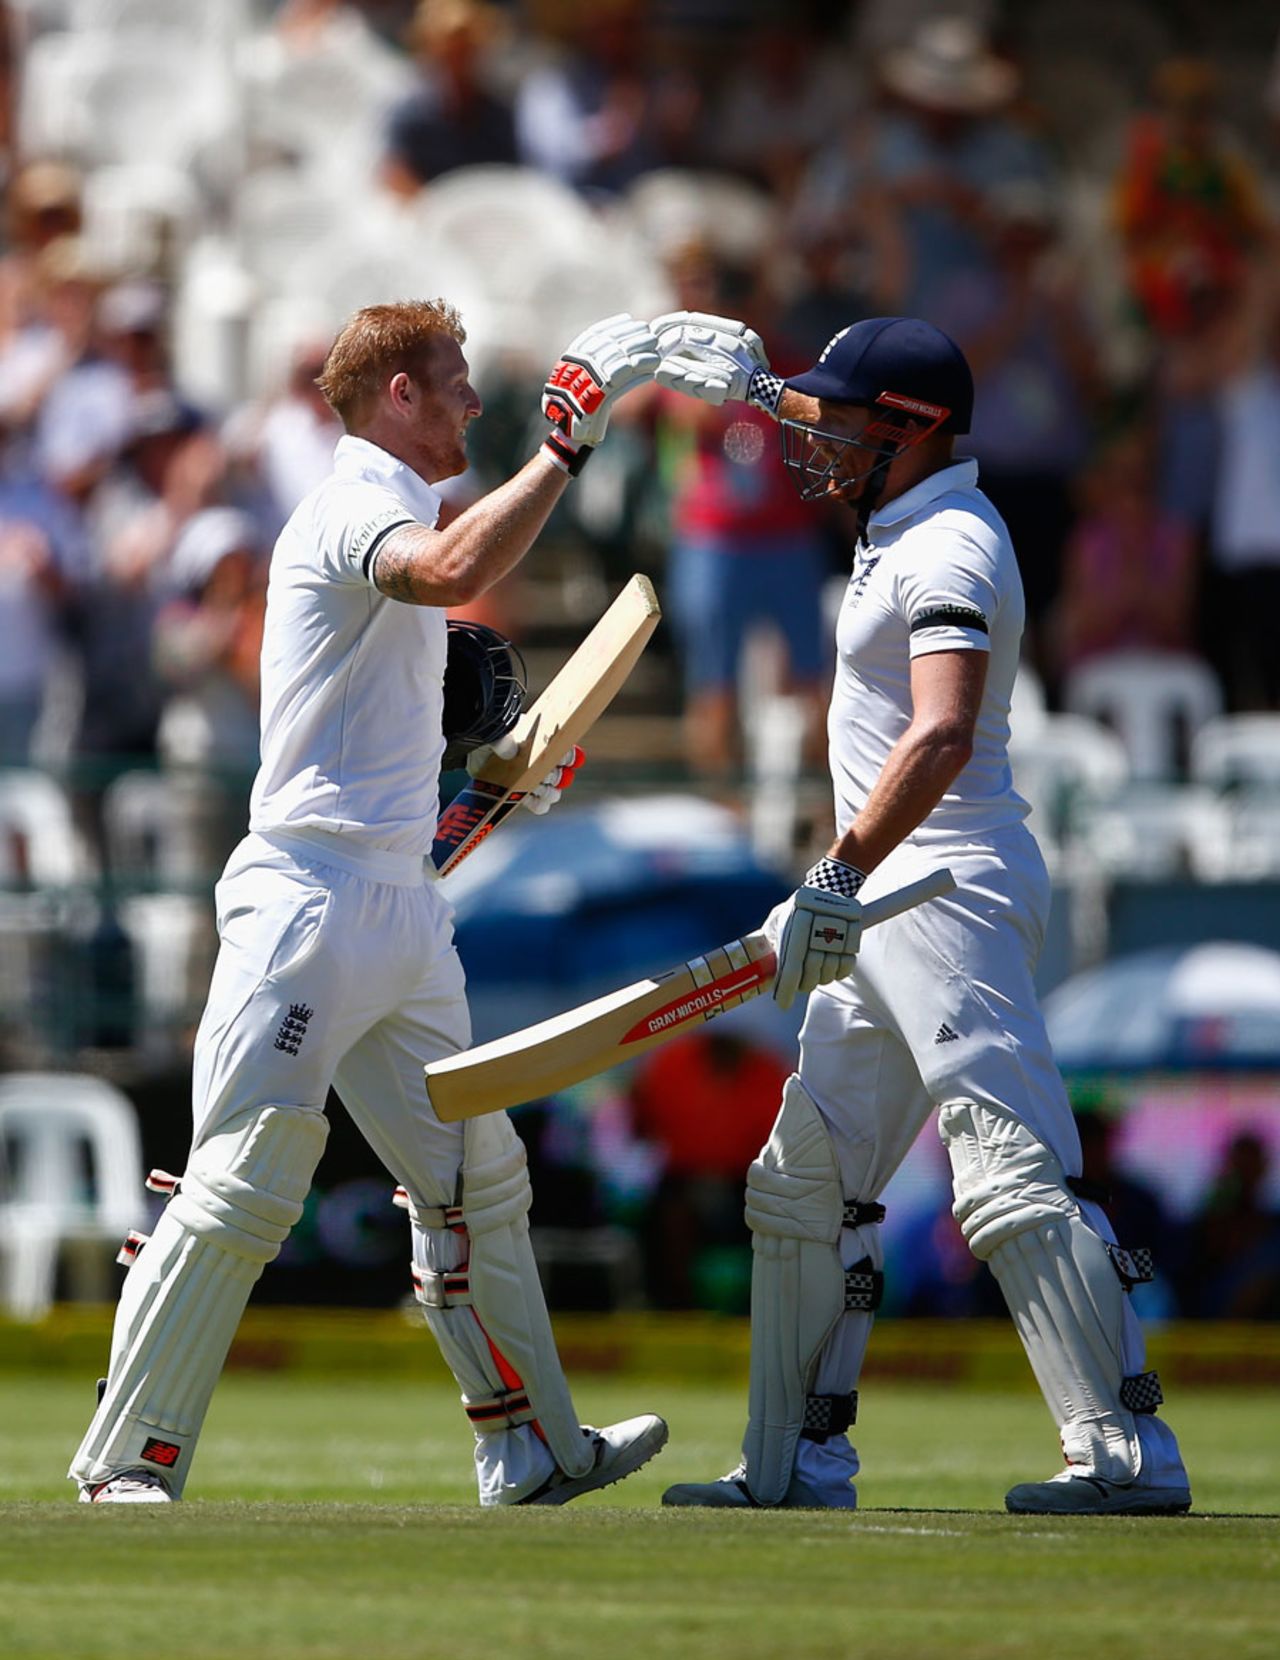 Ben Stokes and Jonny Bairstow had added 290 for the sixth wicket by lunch on day two, South Africa v England, 2nd Test, Cape Town, 2nd day, January 3, 2016